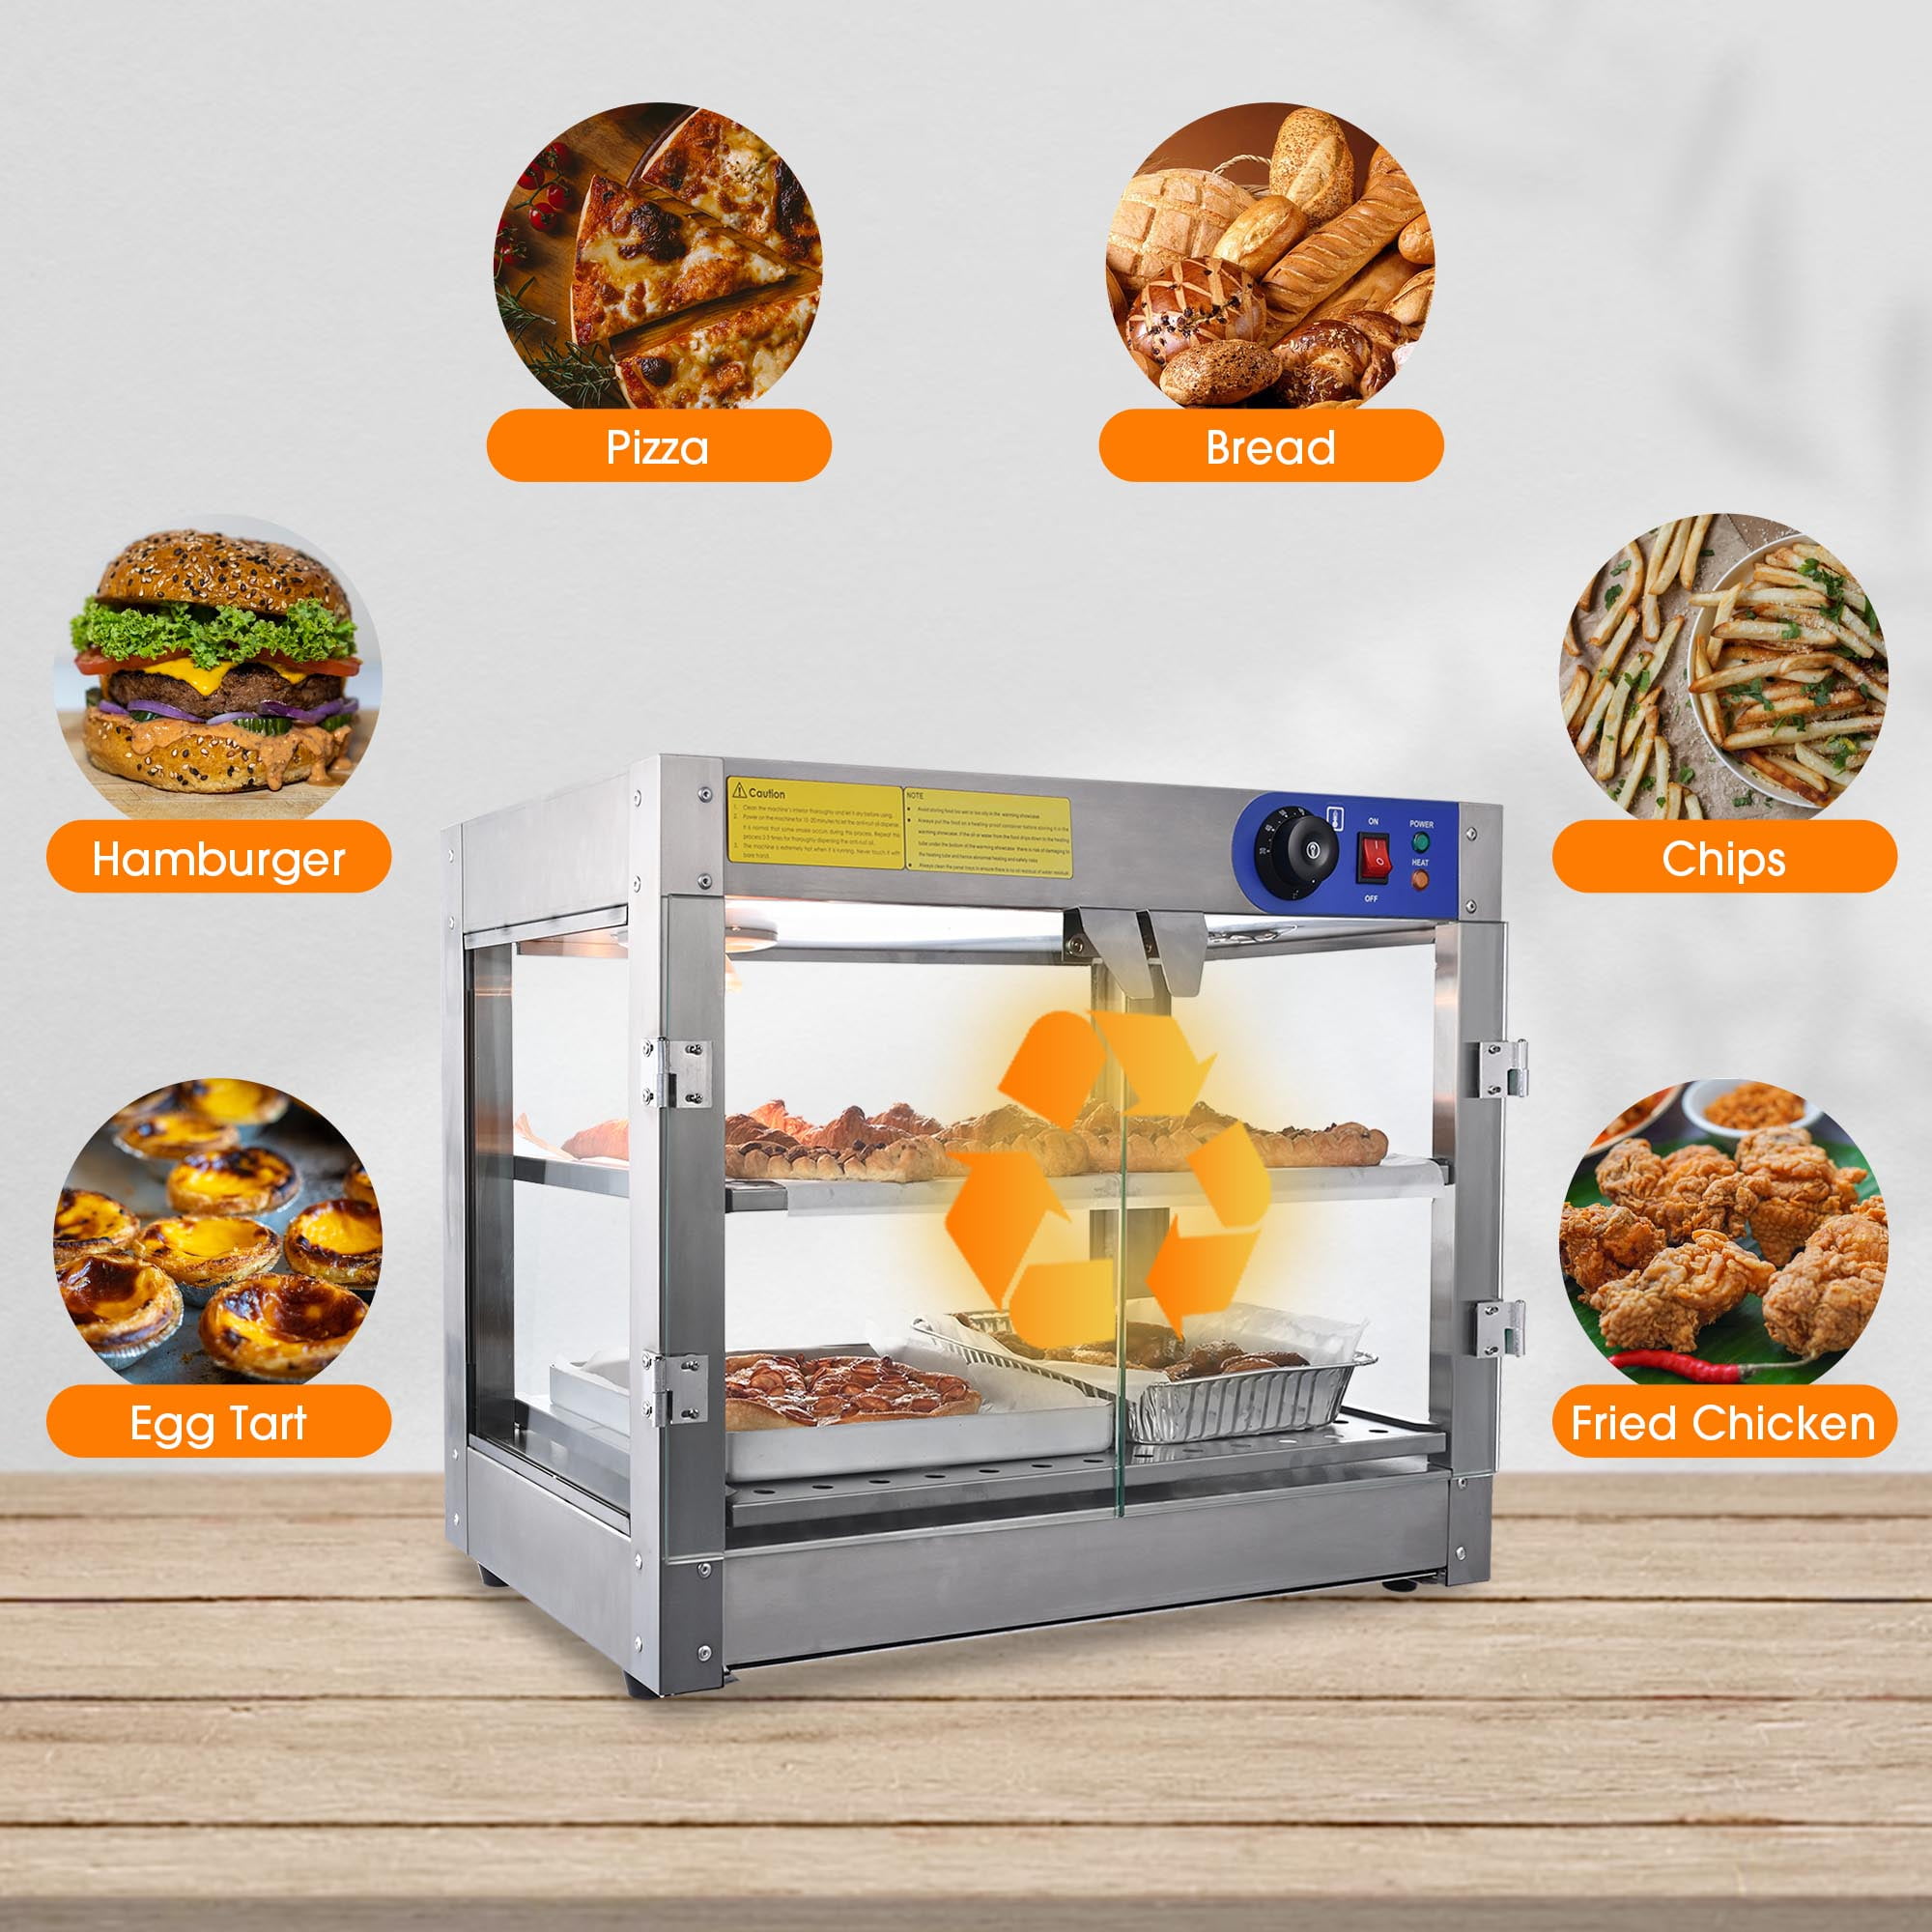 Nurxiovo 35 inch Commercial Food Warmer Countertop Pizza Warmers Display  Pastry Patty Warmer Case for Buffet Restaurant Heater Food Service, L35 x  W19